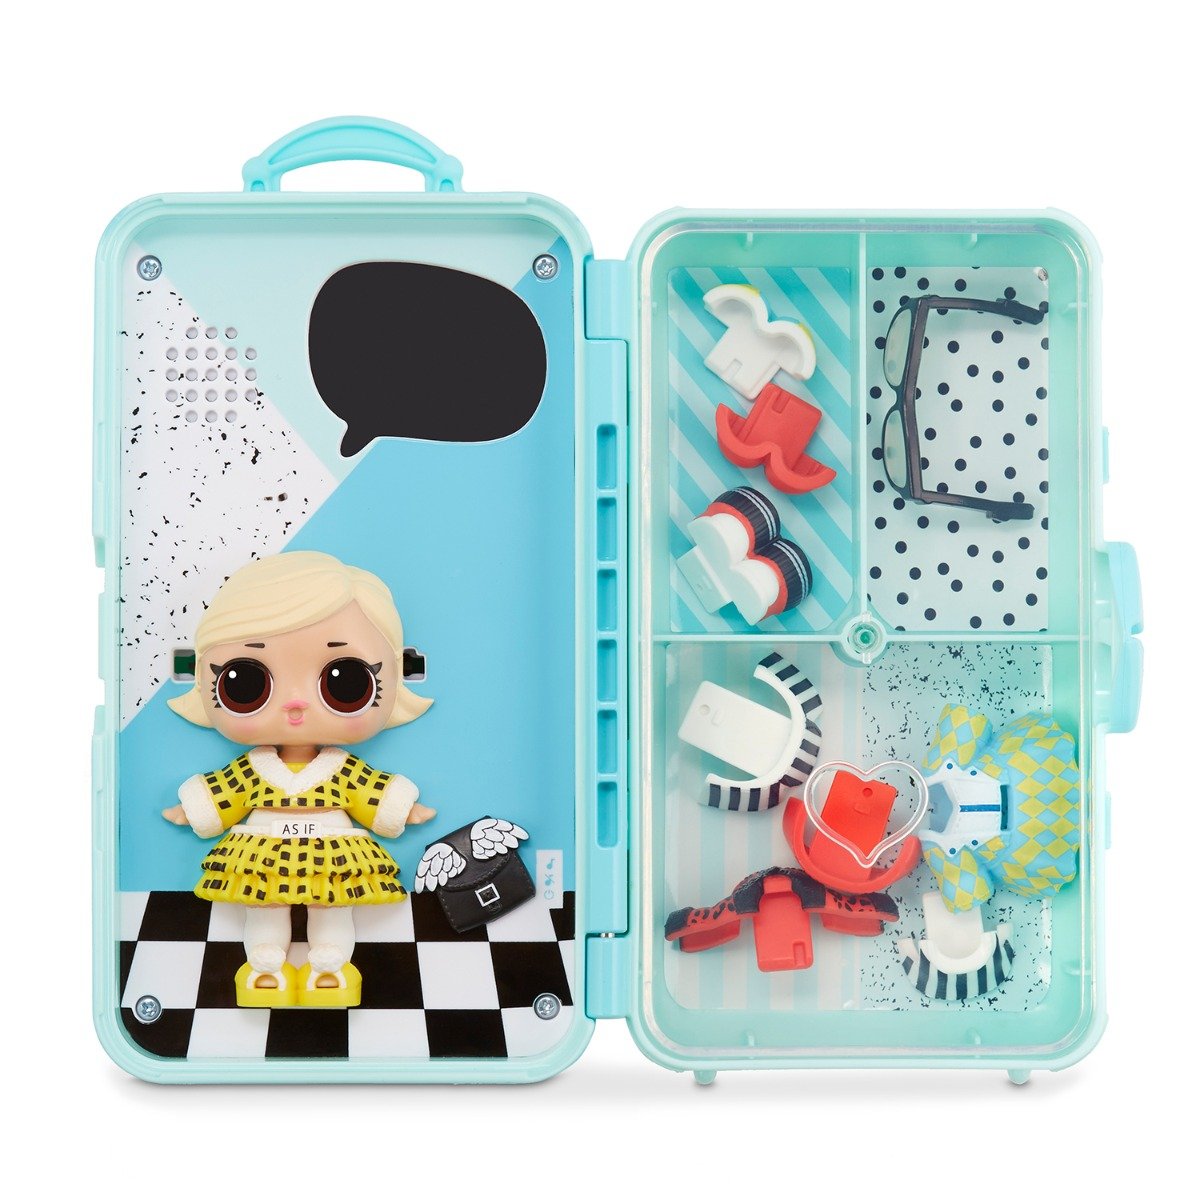 Papusa LOL Surprise Style Suitcase, As if Baby, 560401